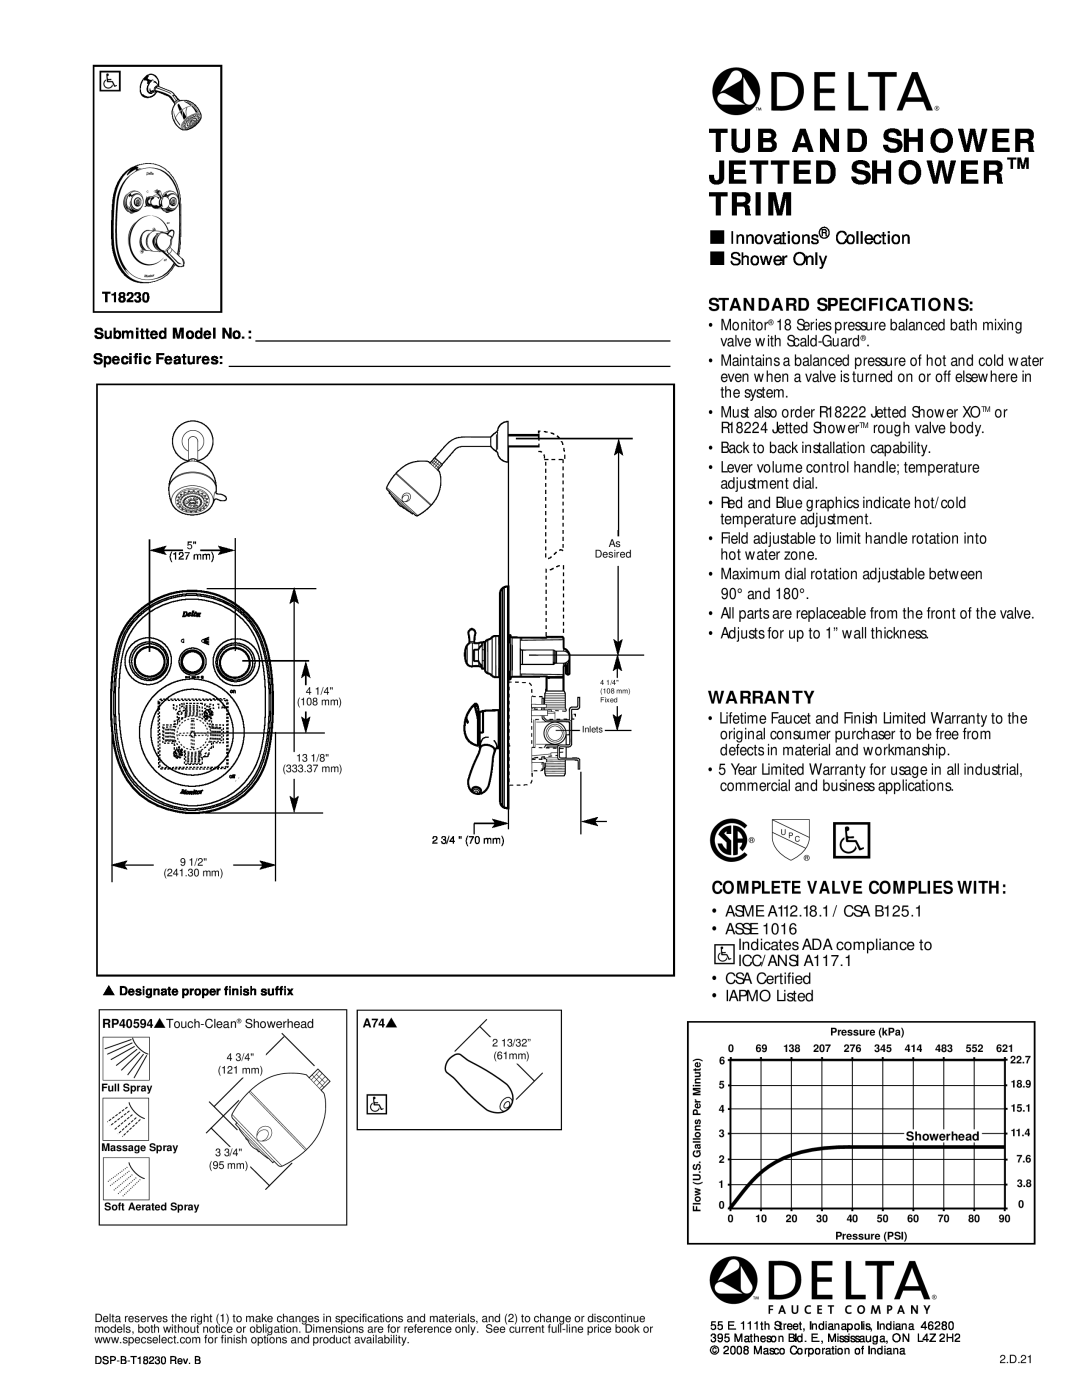 Delta T18230 warranty Tub And Shower Jetted Shower Trim, Innovations Collection Shower Only, Standard Specifications 